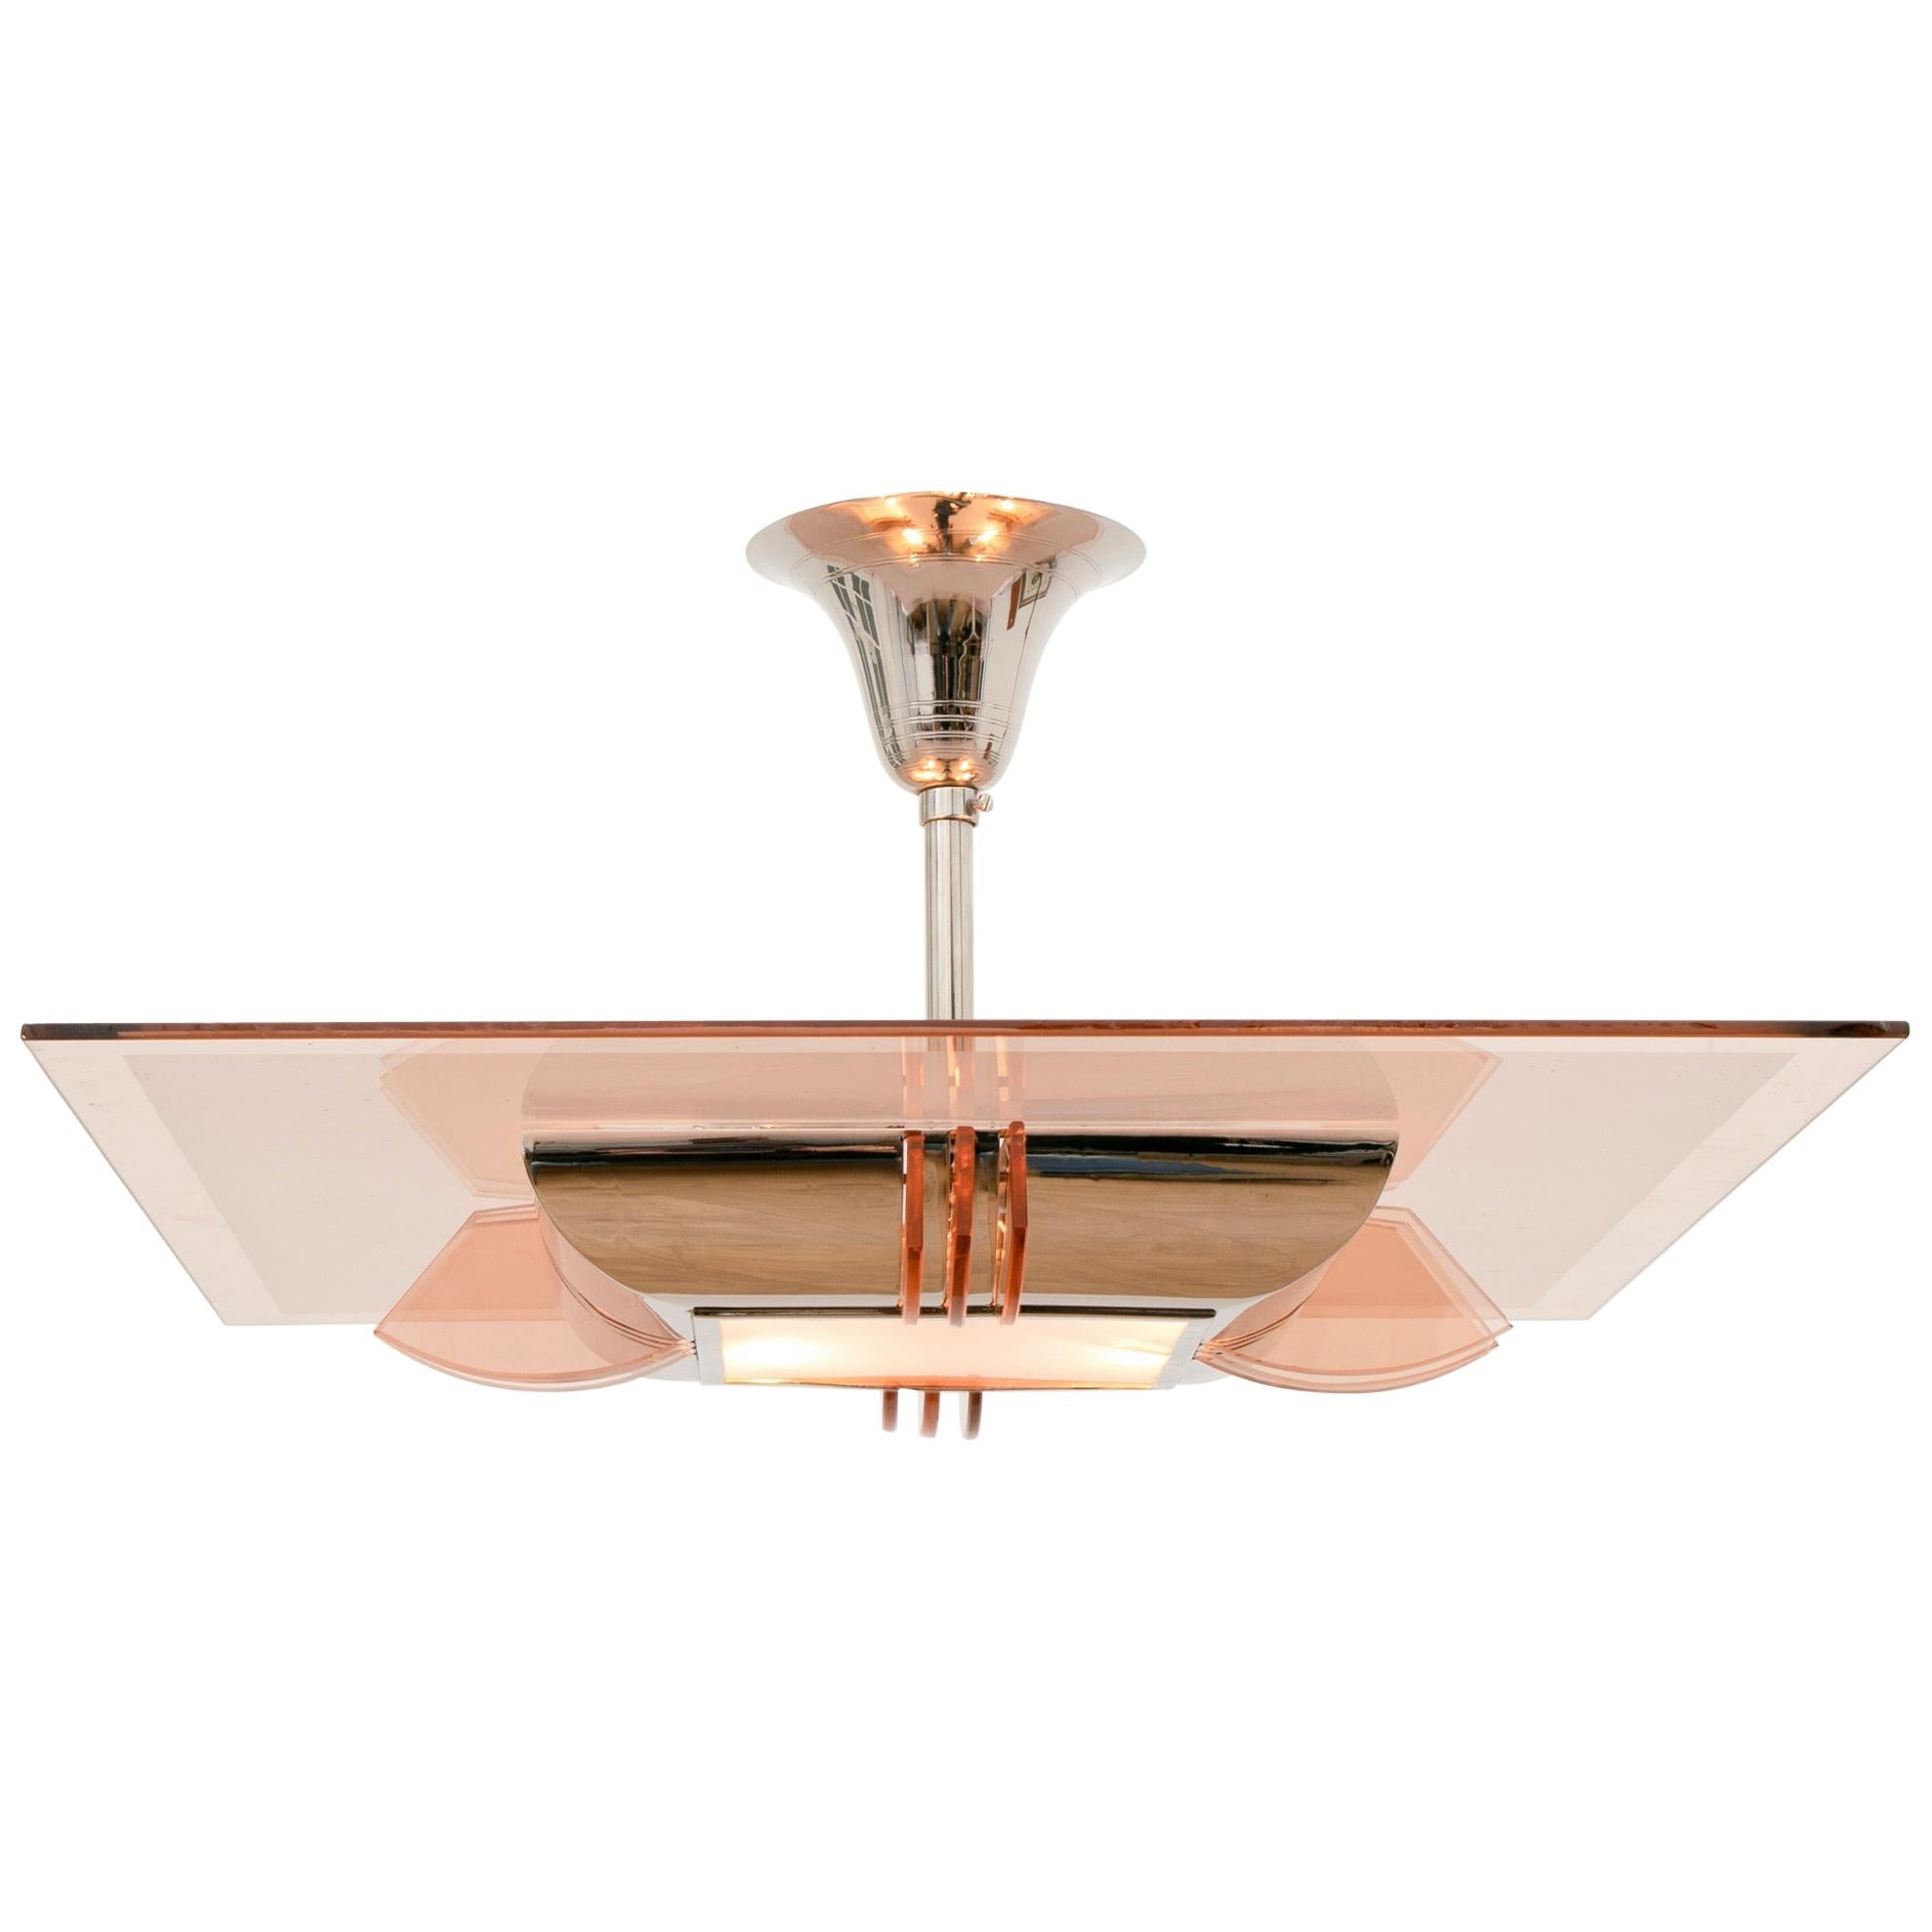 French Art Deco Peach Glass Ceiling Light by Atelier Petitot, circa 1930 For Sale